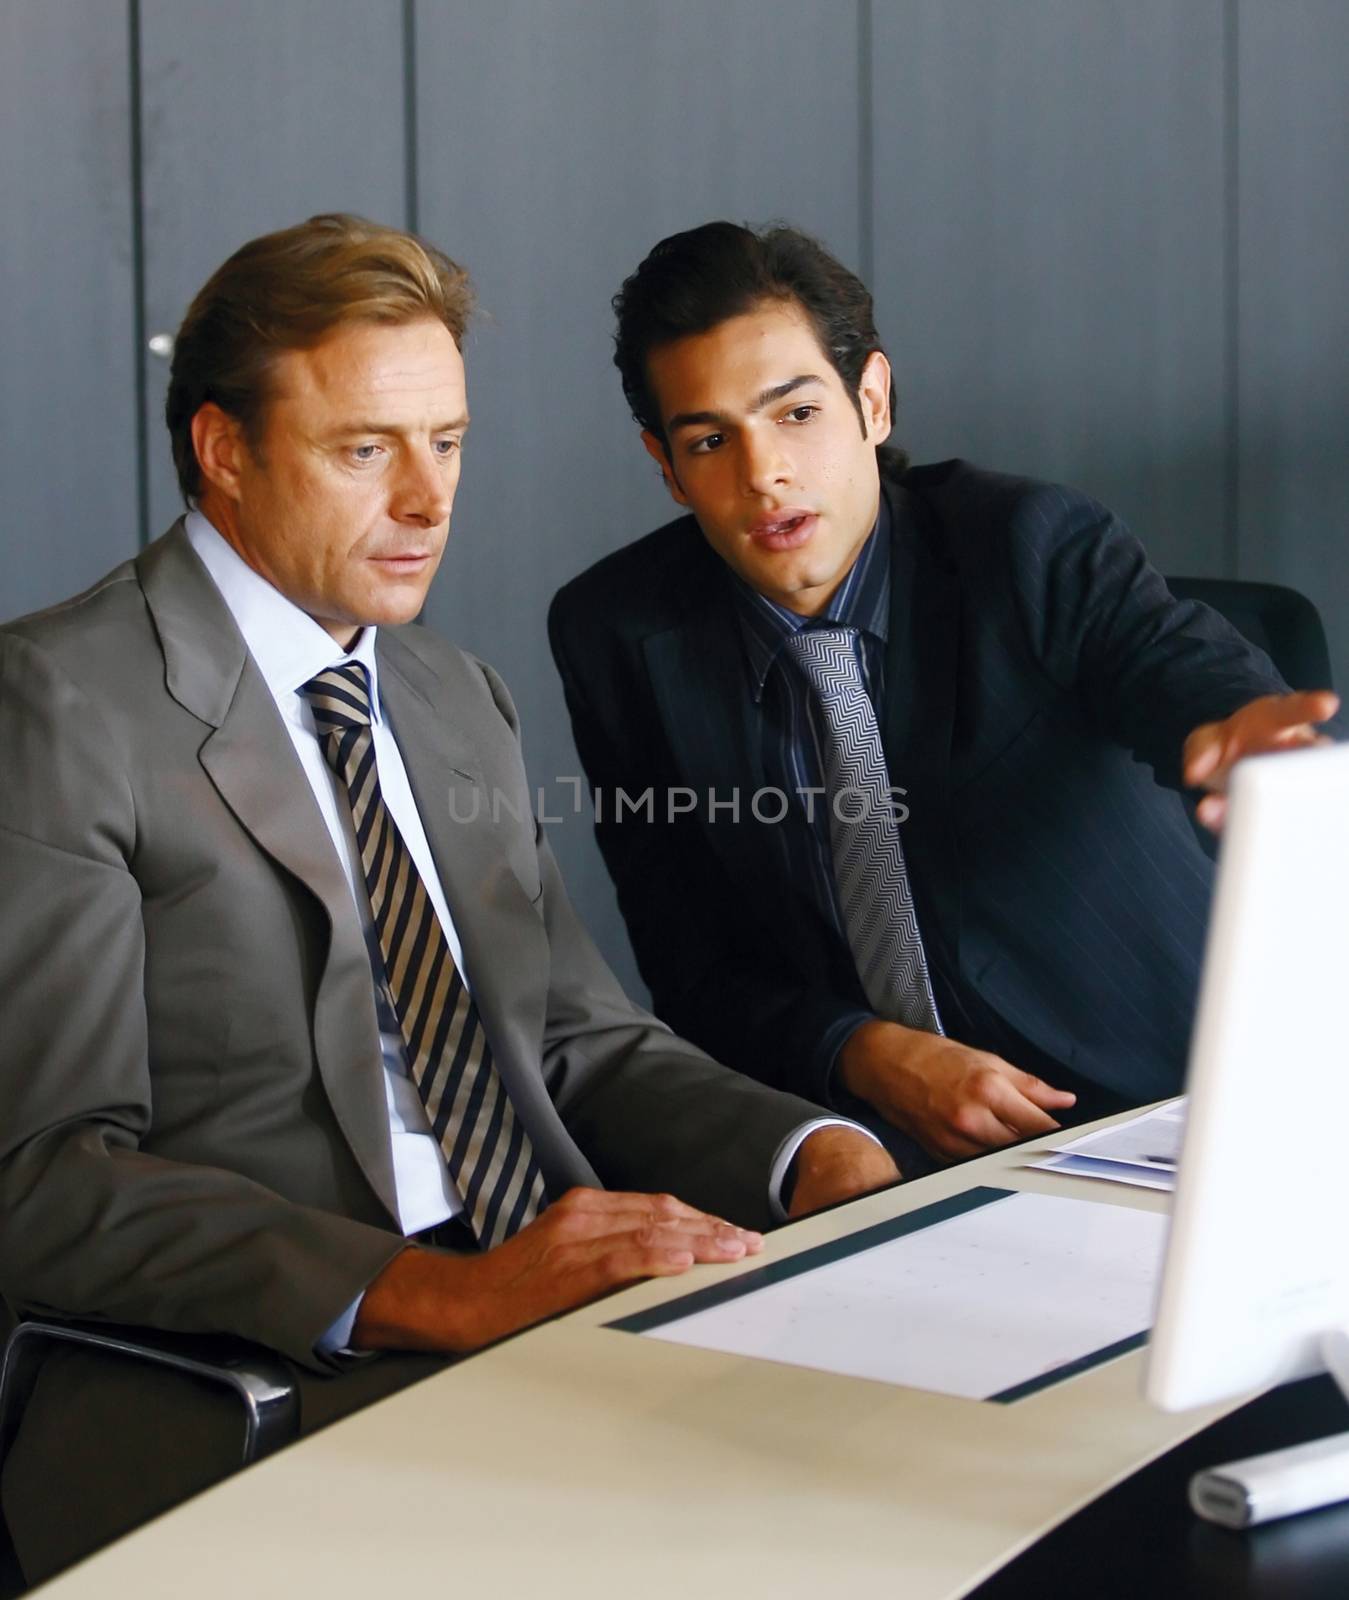 Two concentrated businessmen working together on a laptop in the office 